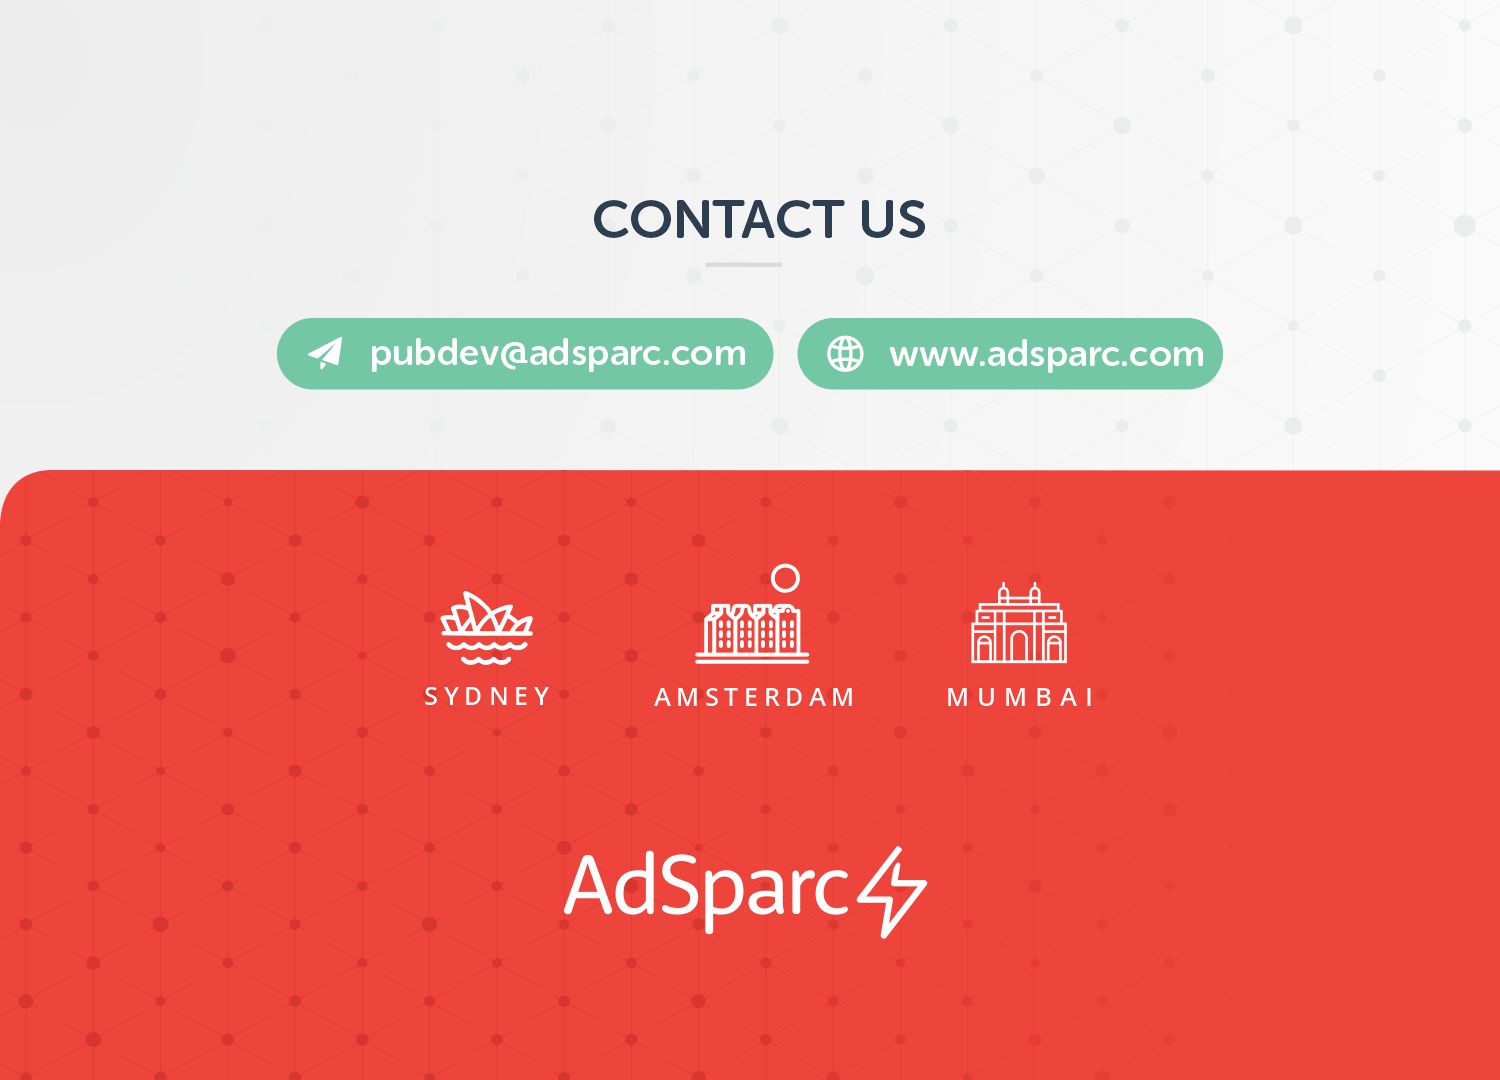 AdSparc - Contact Us